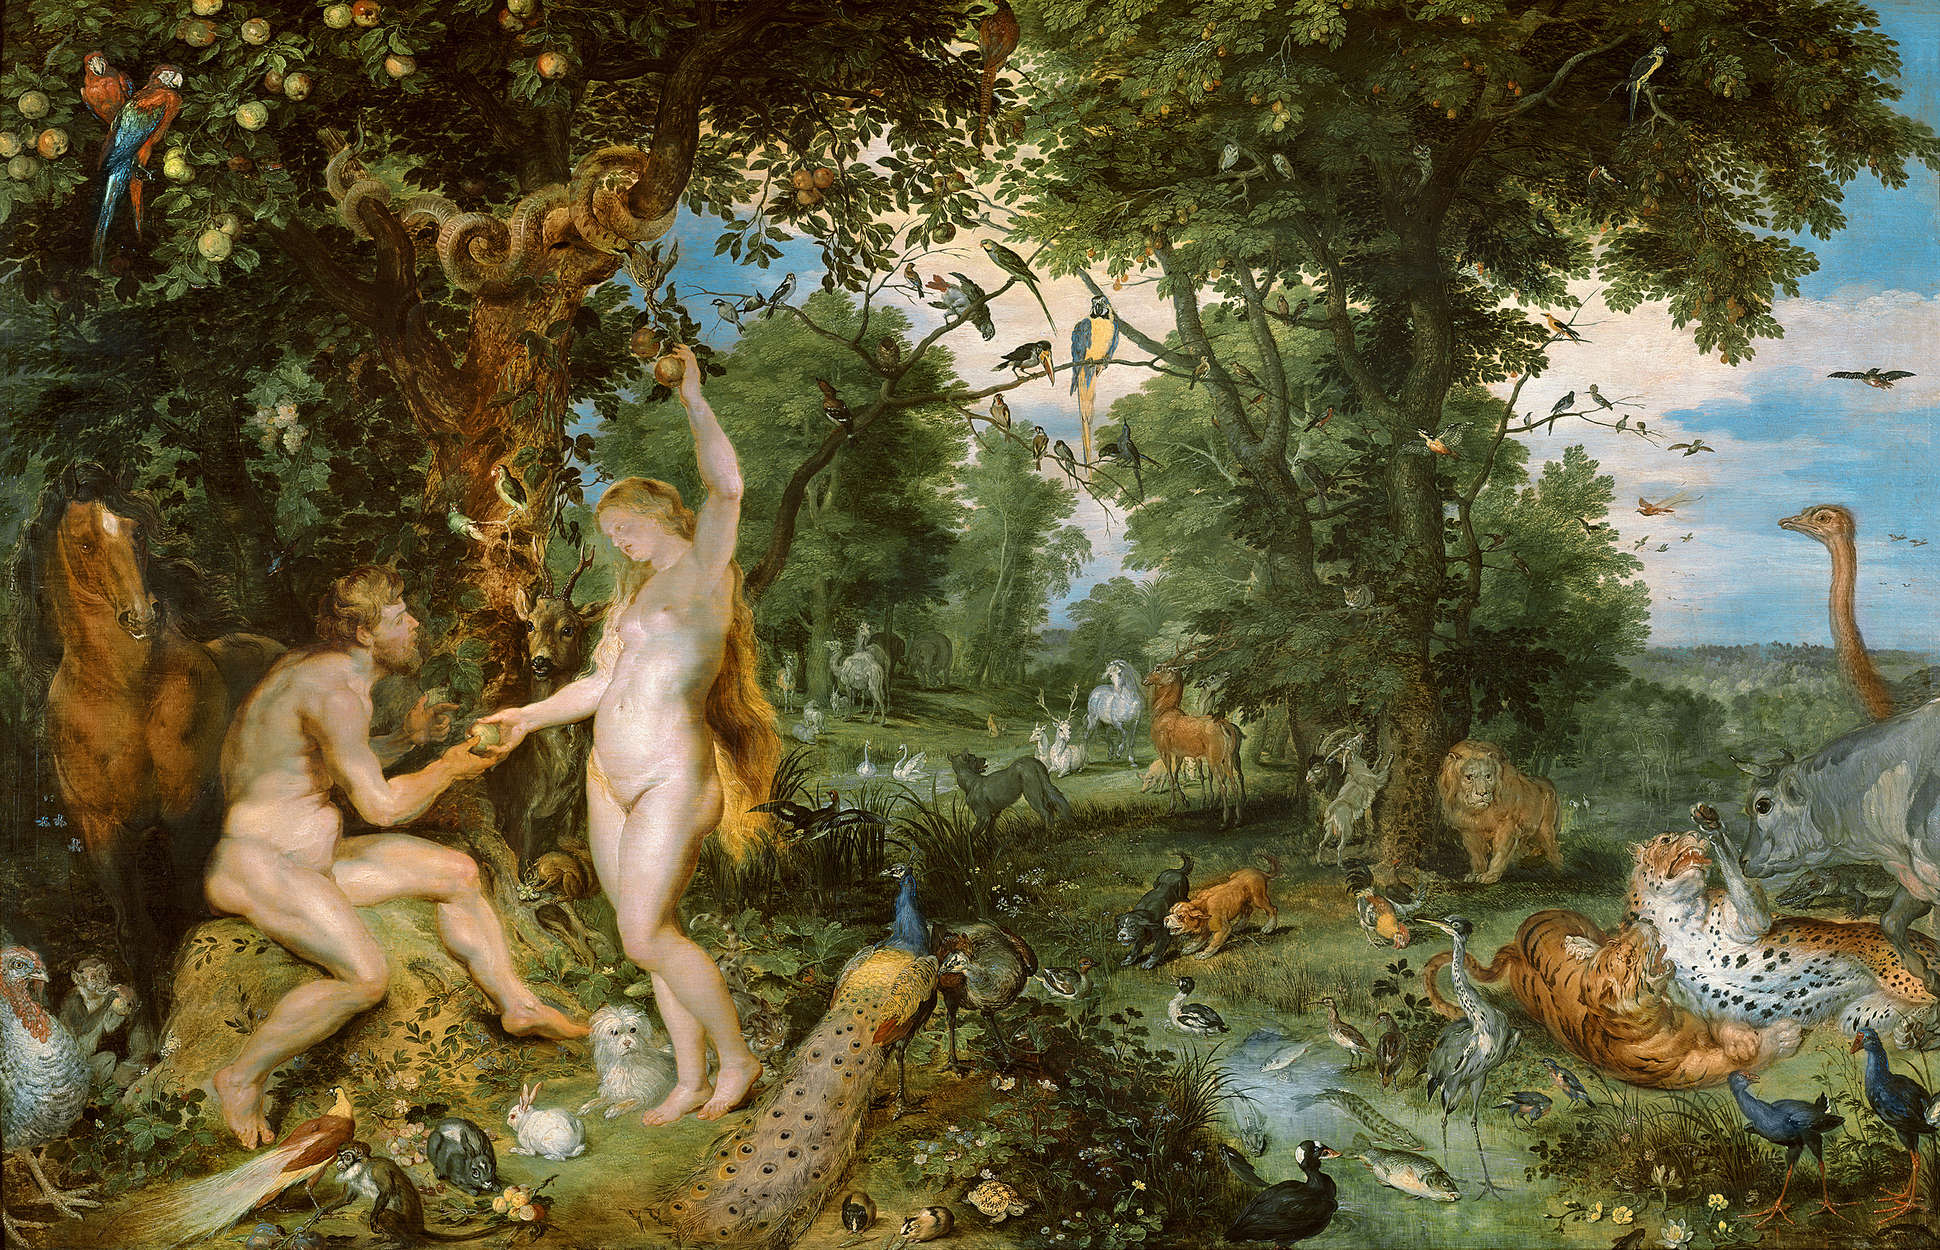             Photo wallpaper "The Garden of Eden with the Fall" by Pieter Brueghel
        